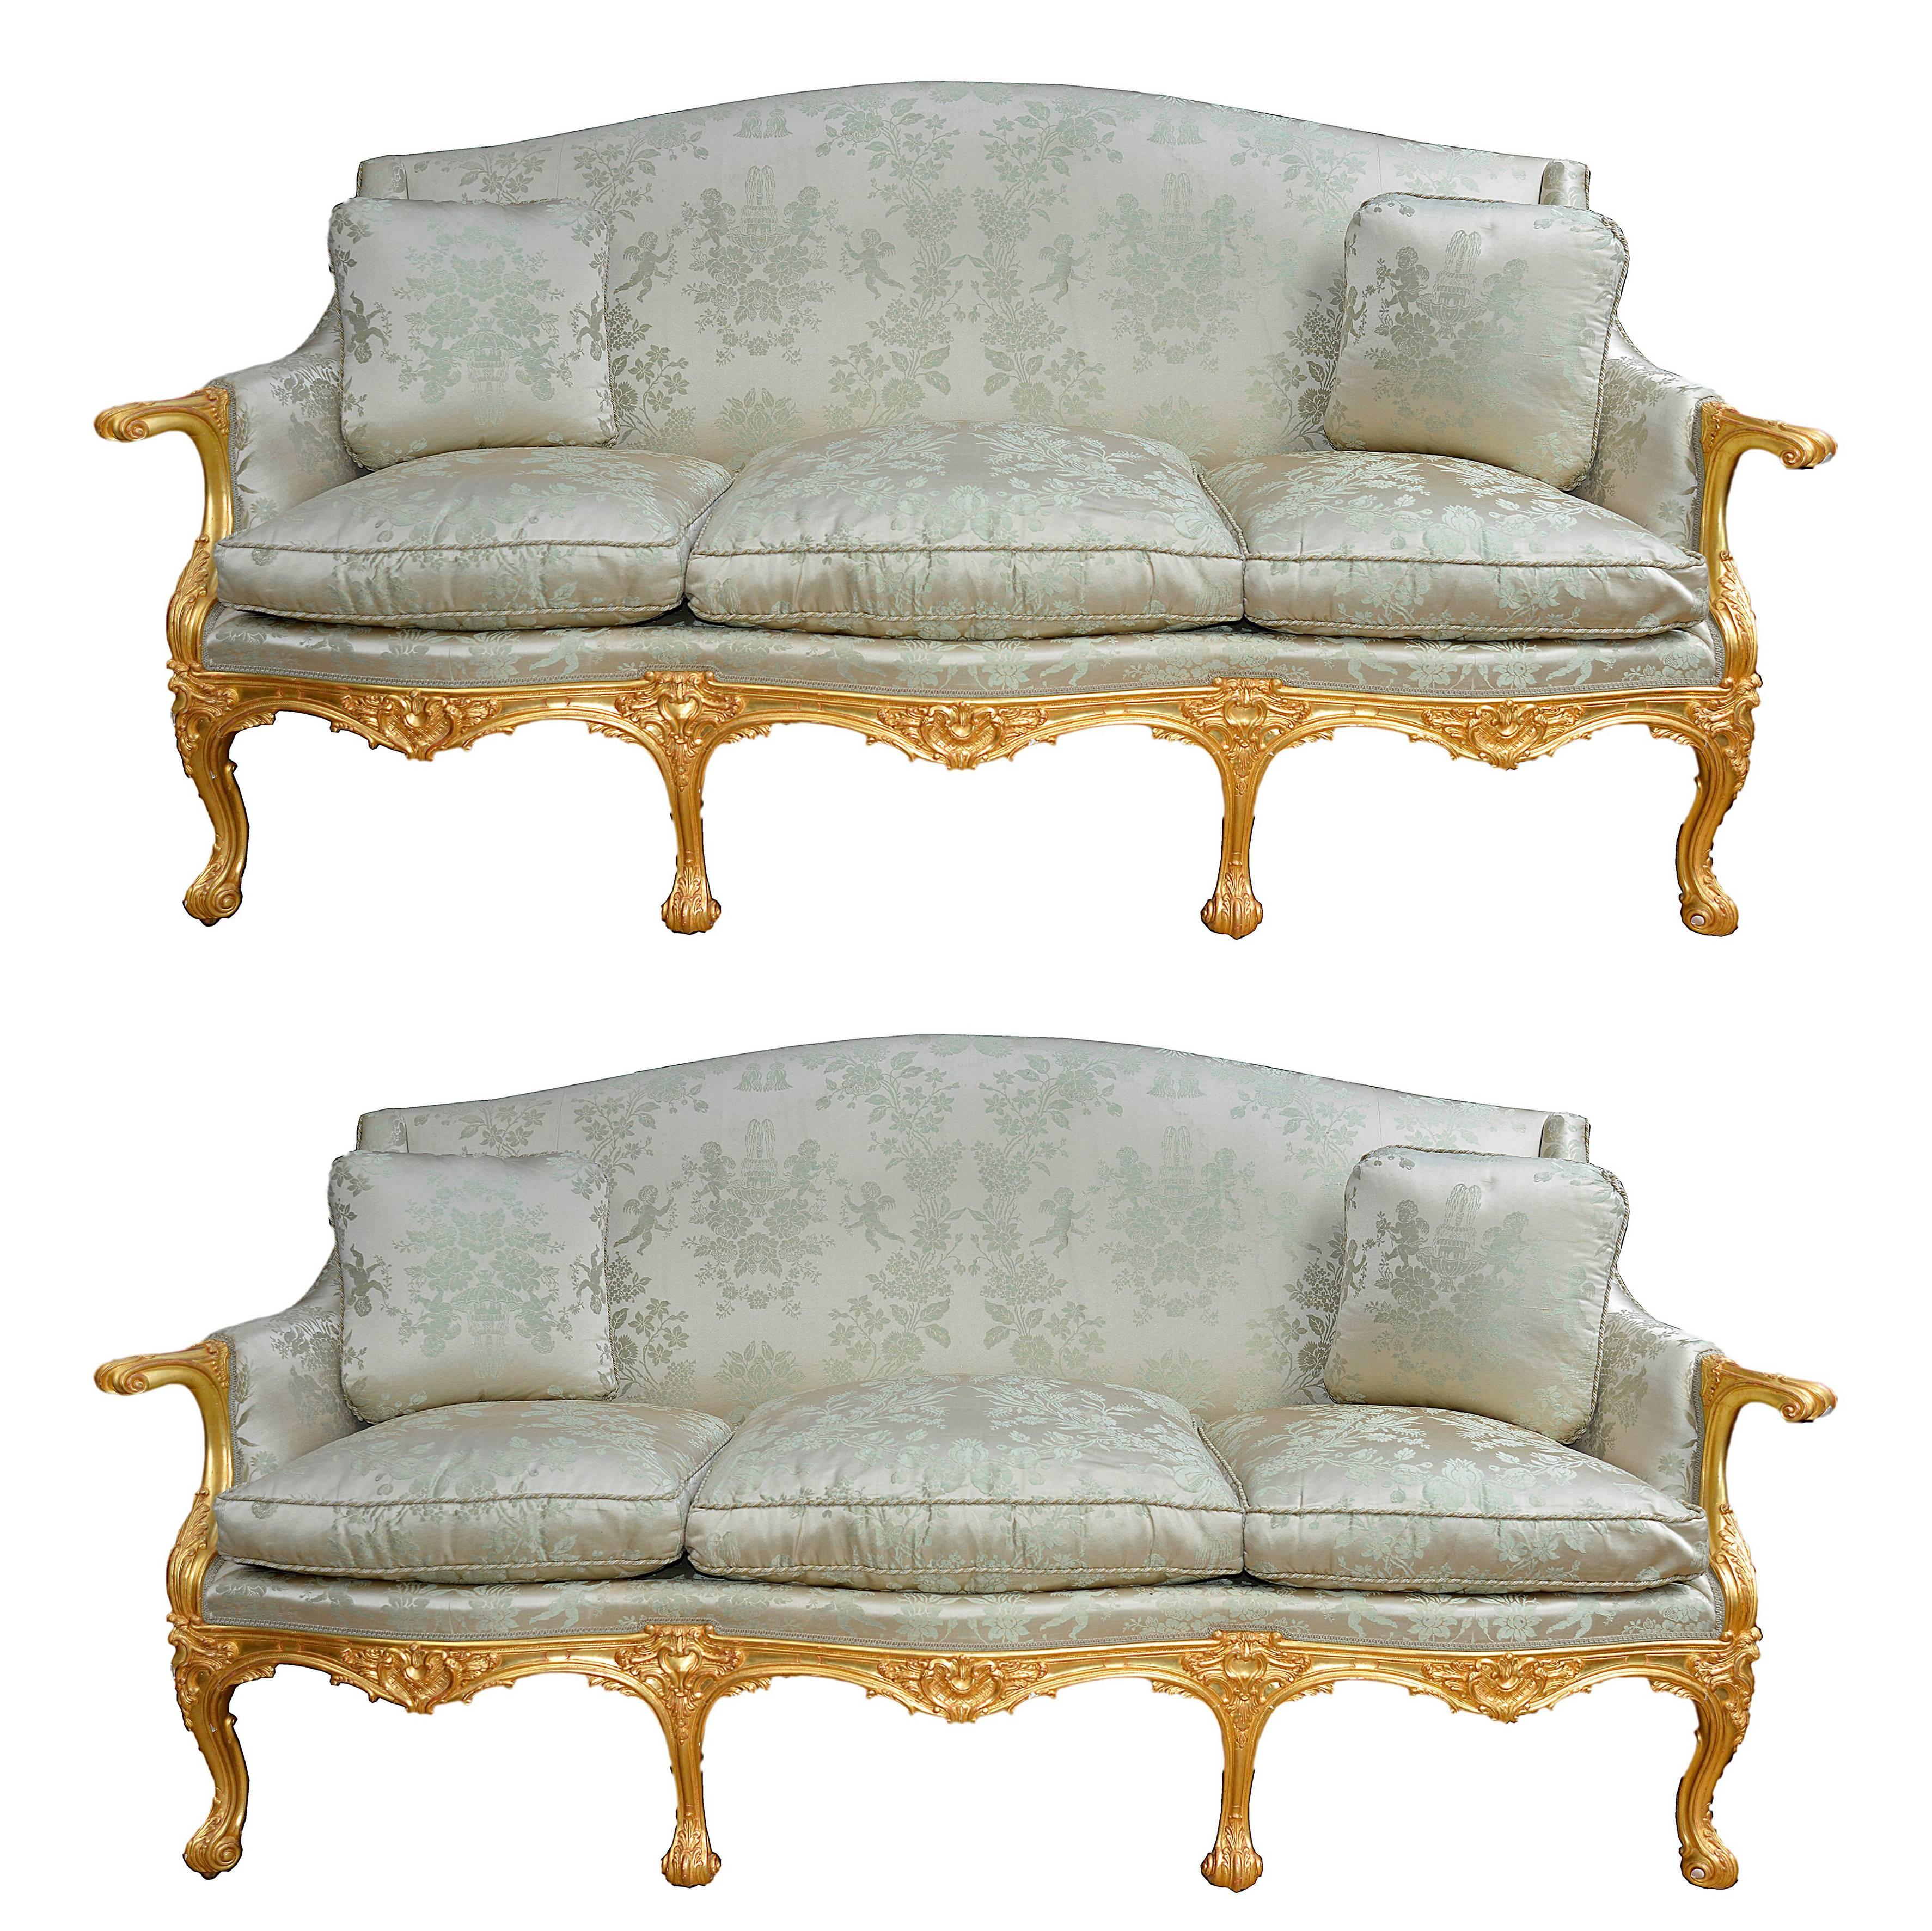 Pair of French Louis XVI Style Gilded Sofas, Late 19th Century